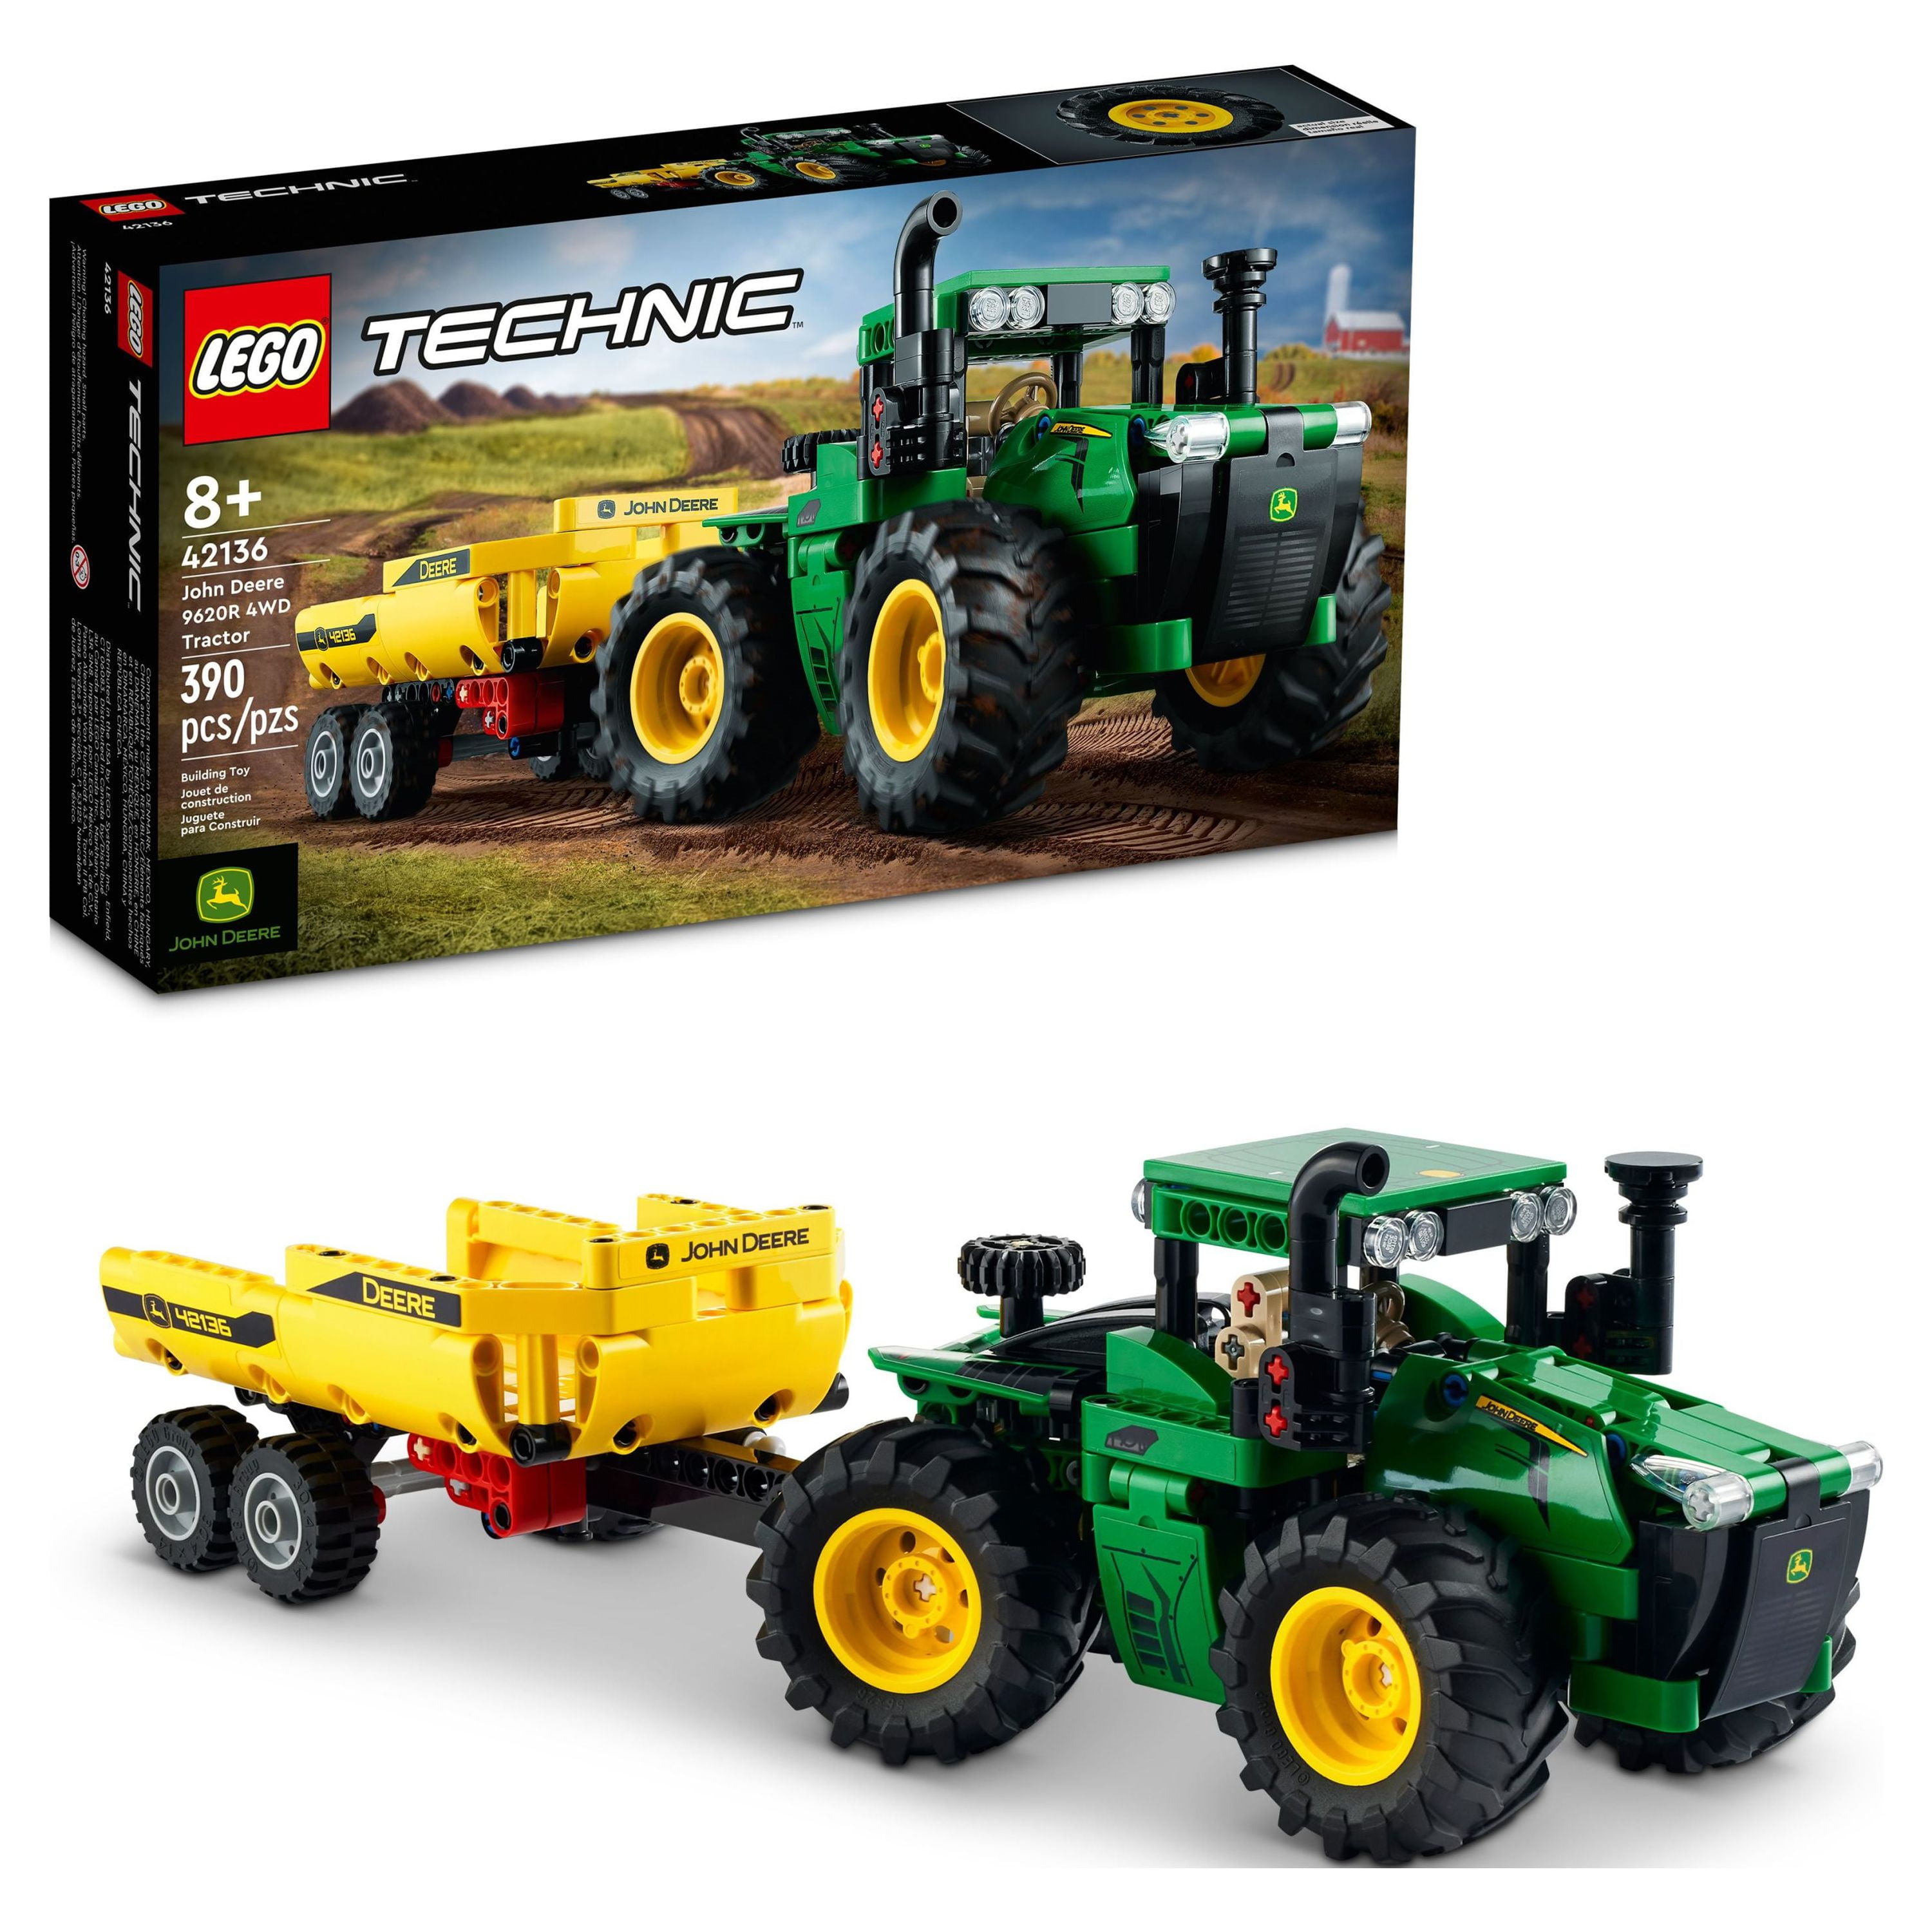 LEGO Technic John Deere 9620R 4WD Tractor Toy 42136 Building Toy